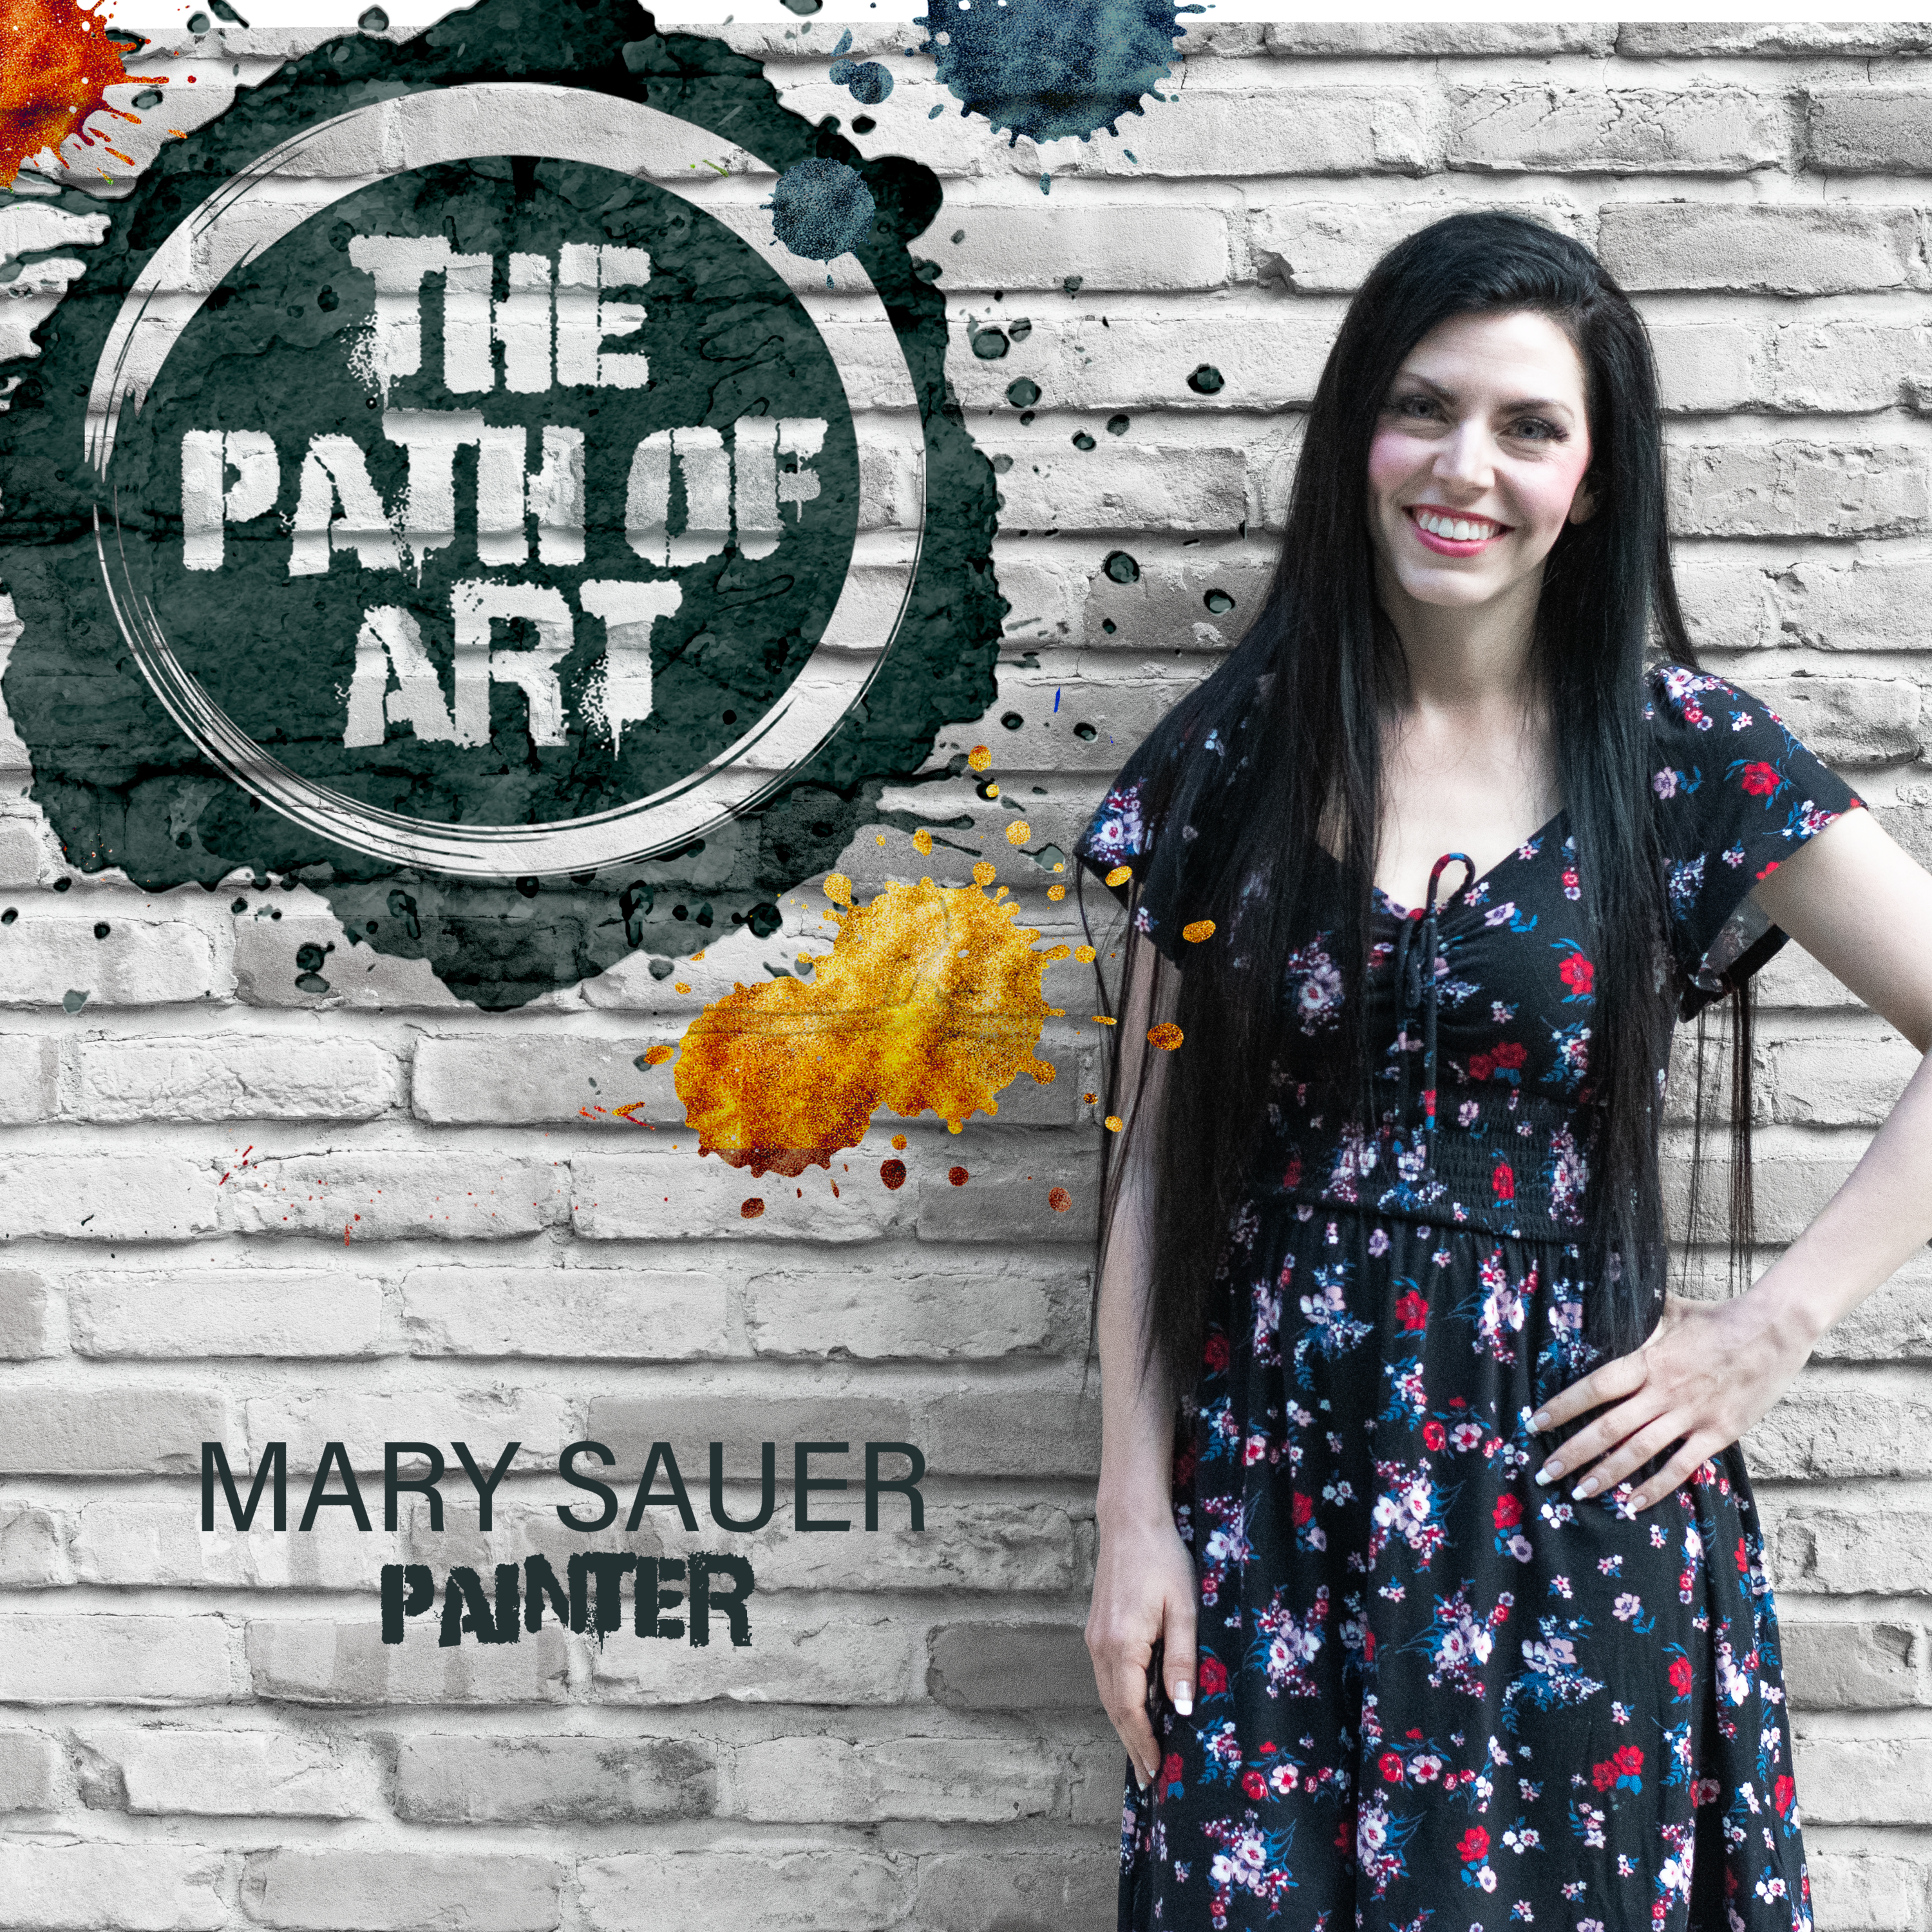 #24 Mary Sauer: Be obsessed with making art